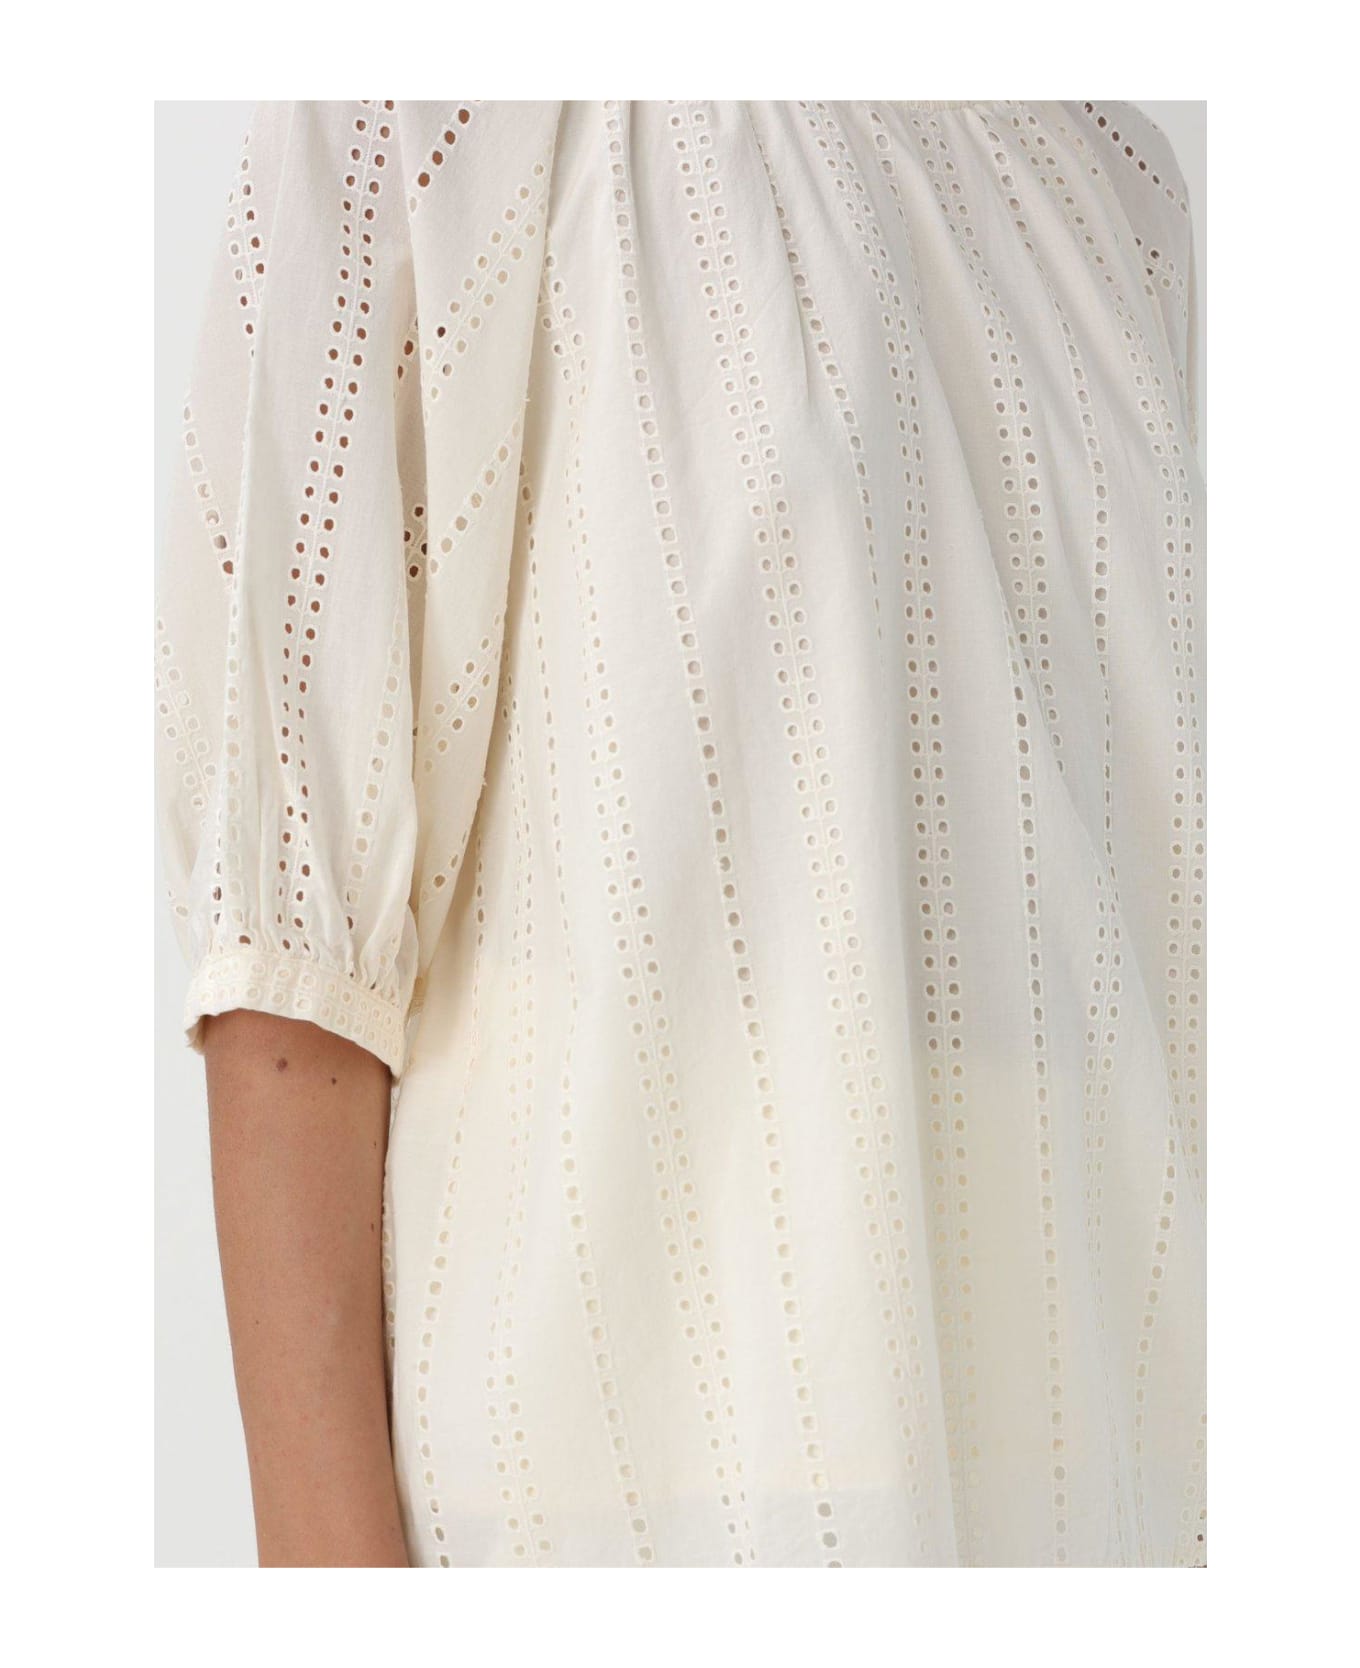 Woolrich Embroidered Short-sleeved Blouse - White